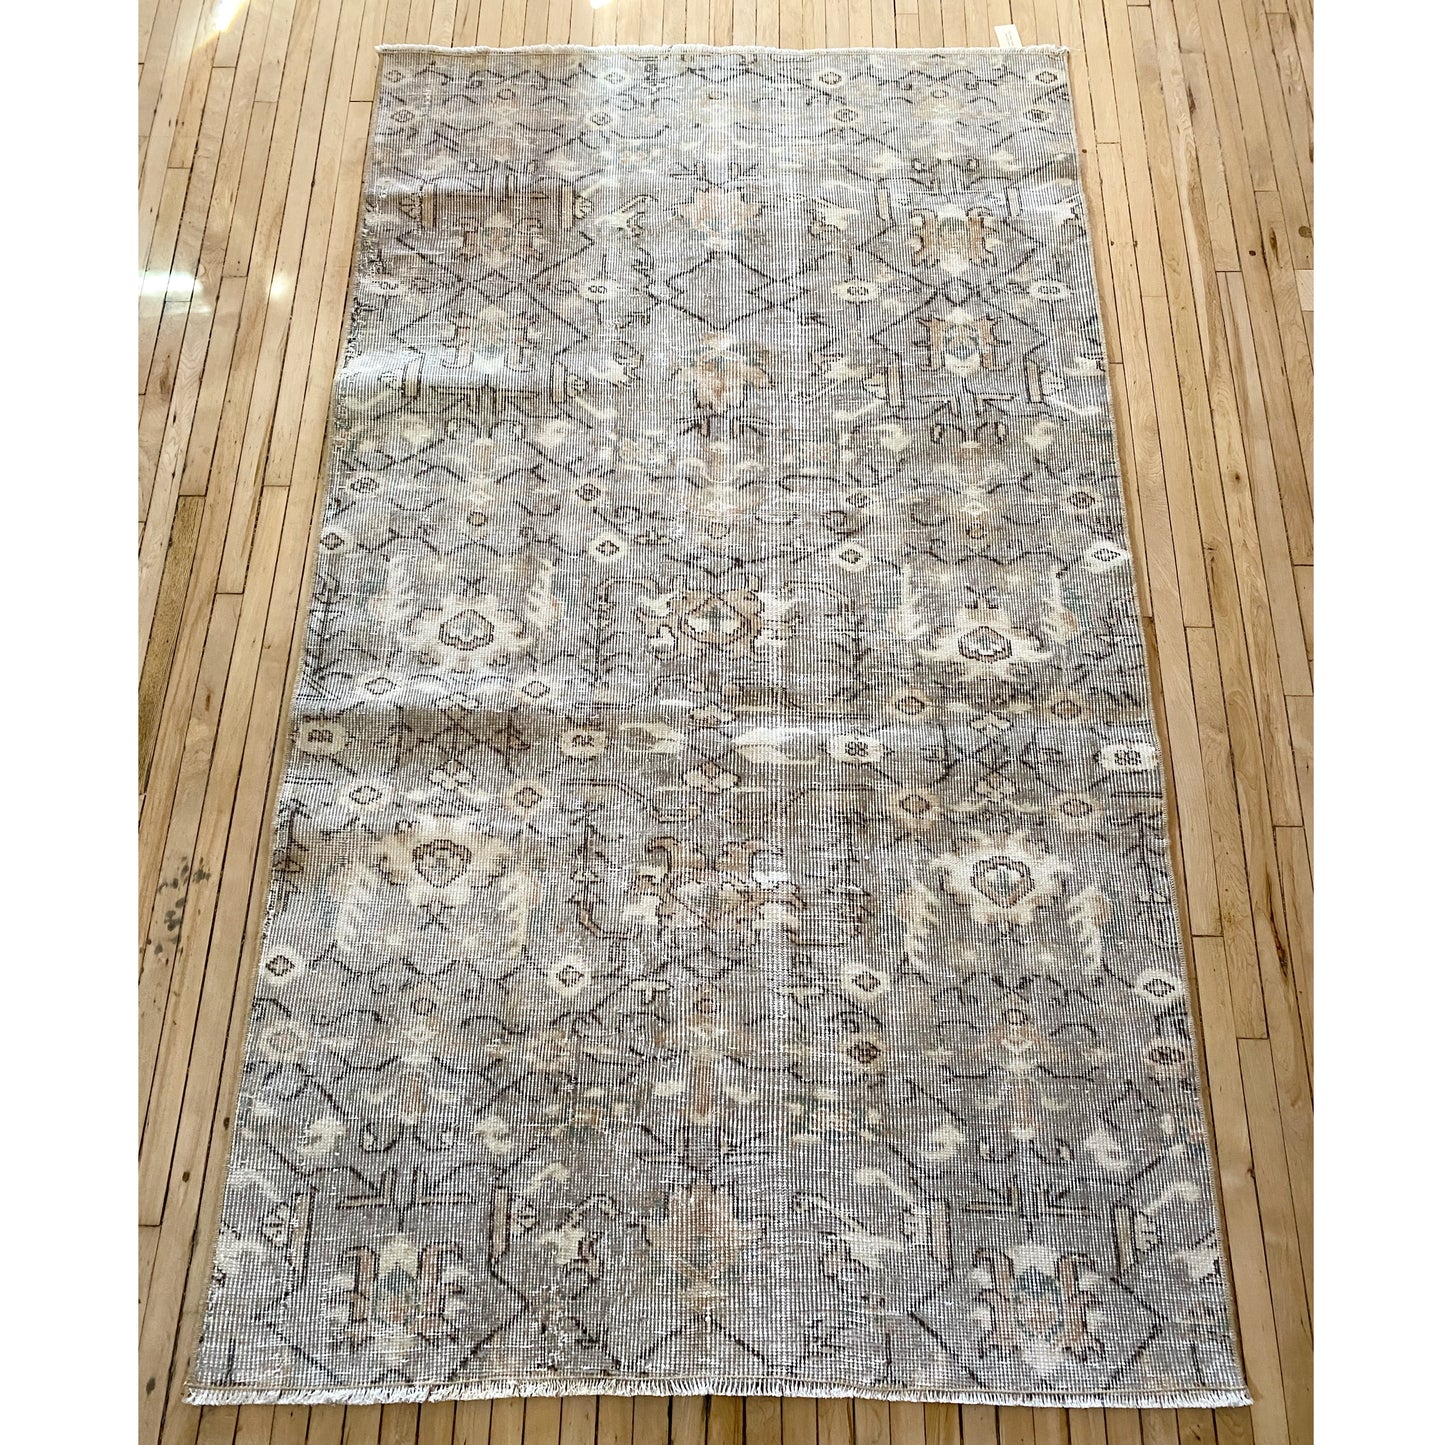 THEA Vintage Hand-knotted Wool Rug (3.8 x 6.5)